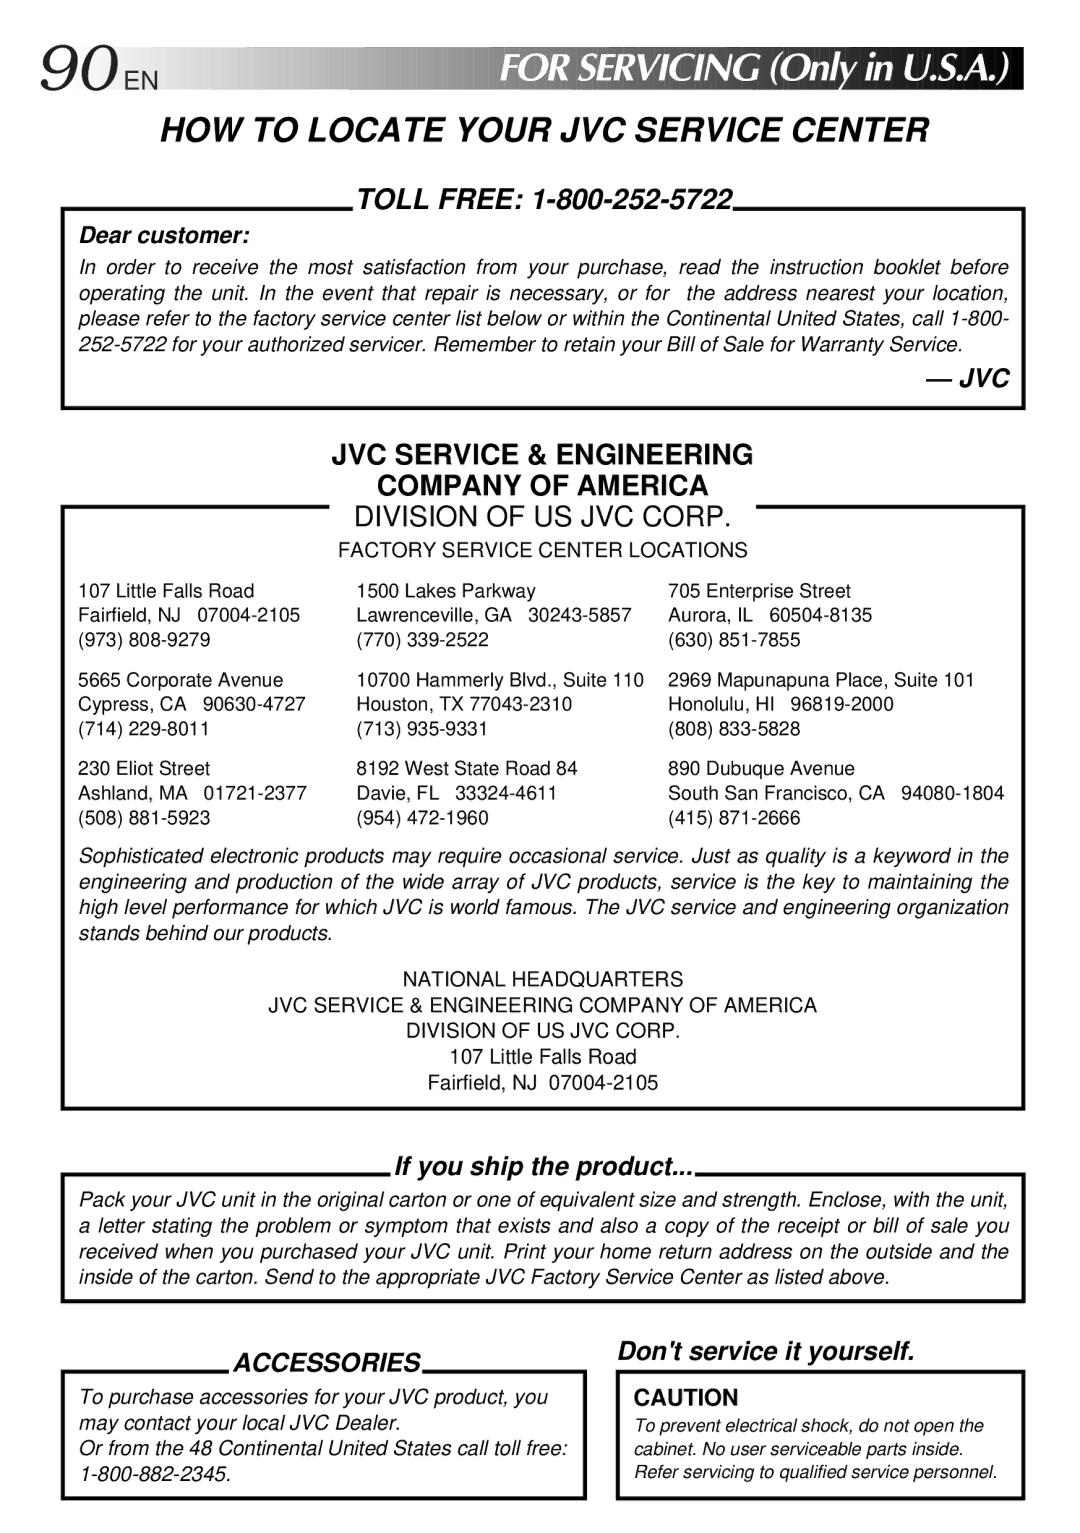 JVC GR-AXM900 manual EN for Servicing Only in U.S.A, HOW to Locate Your JVC Service Center 